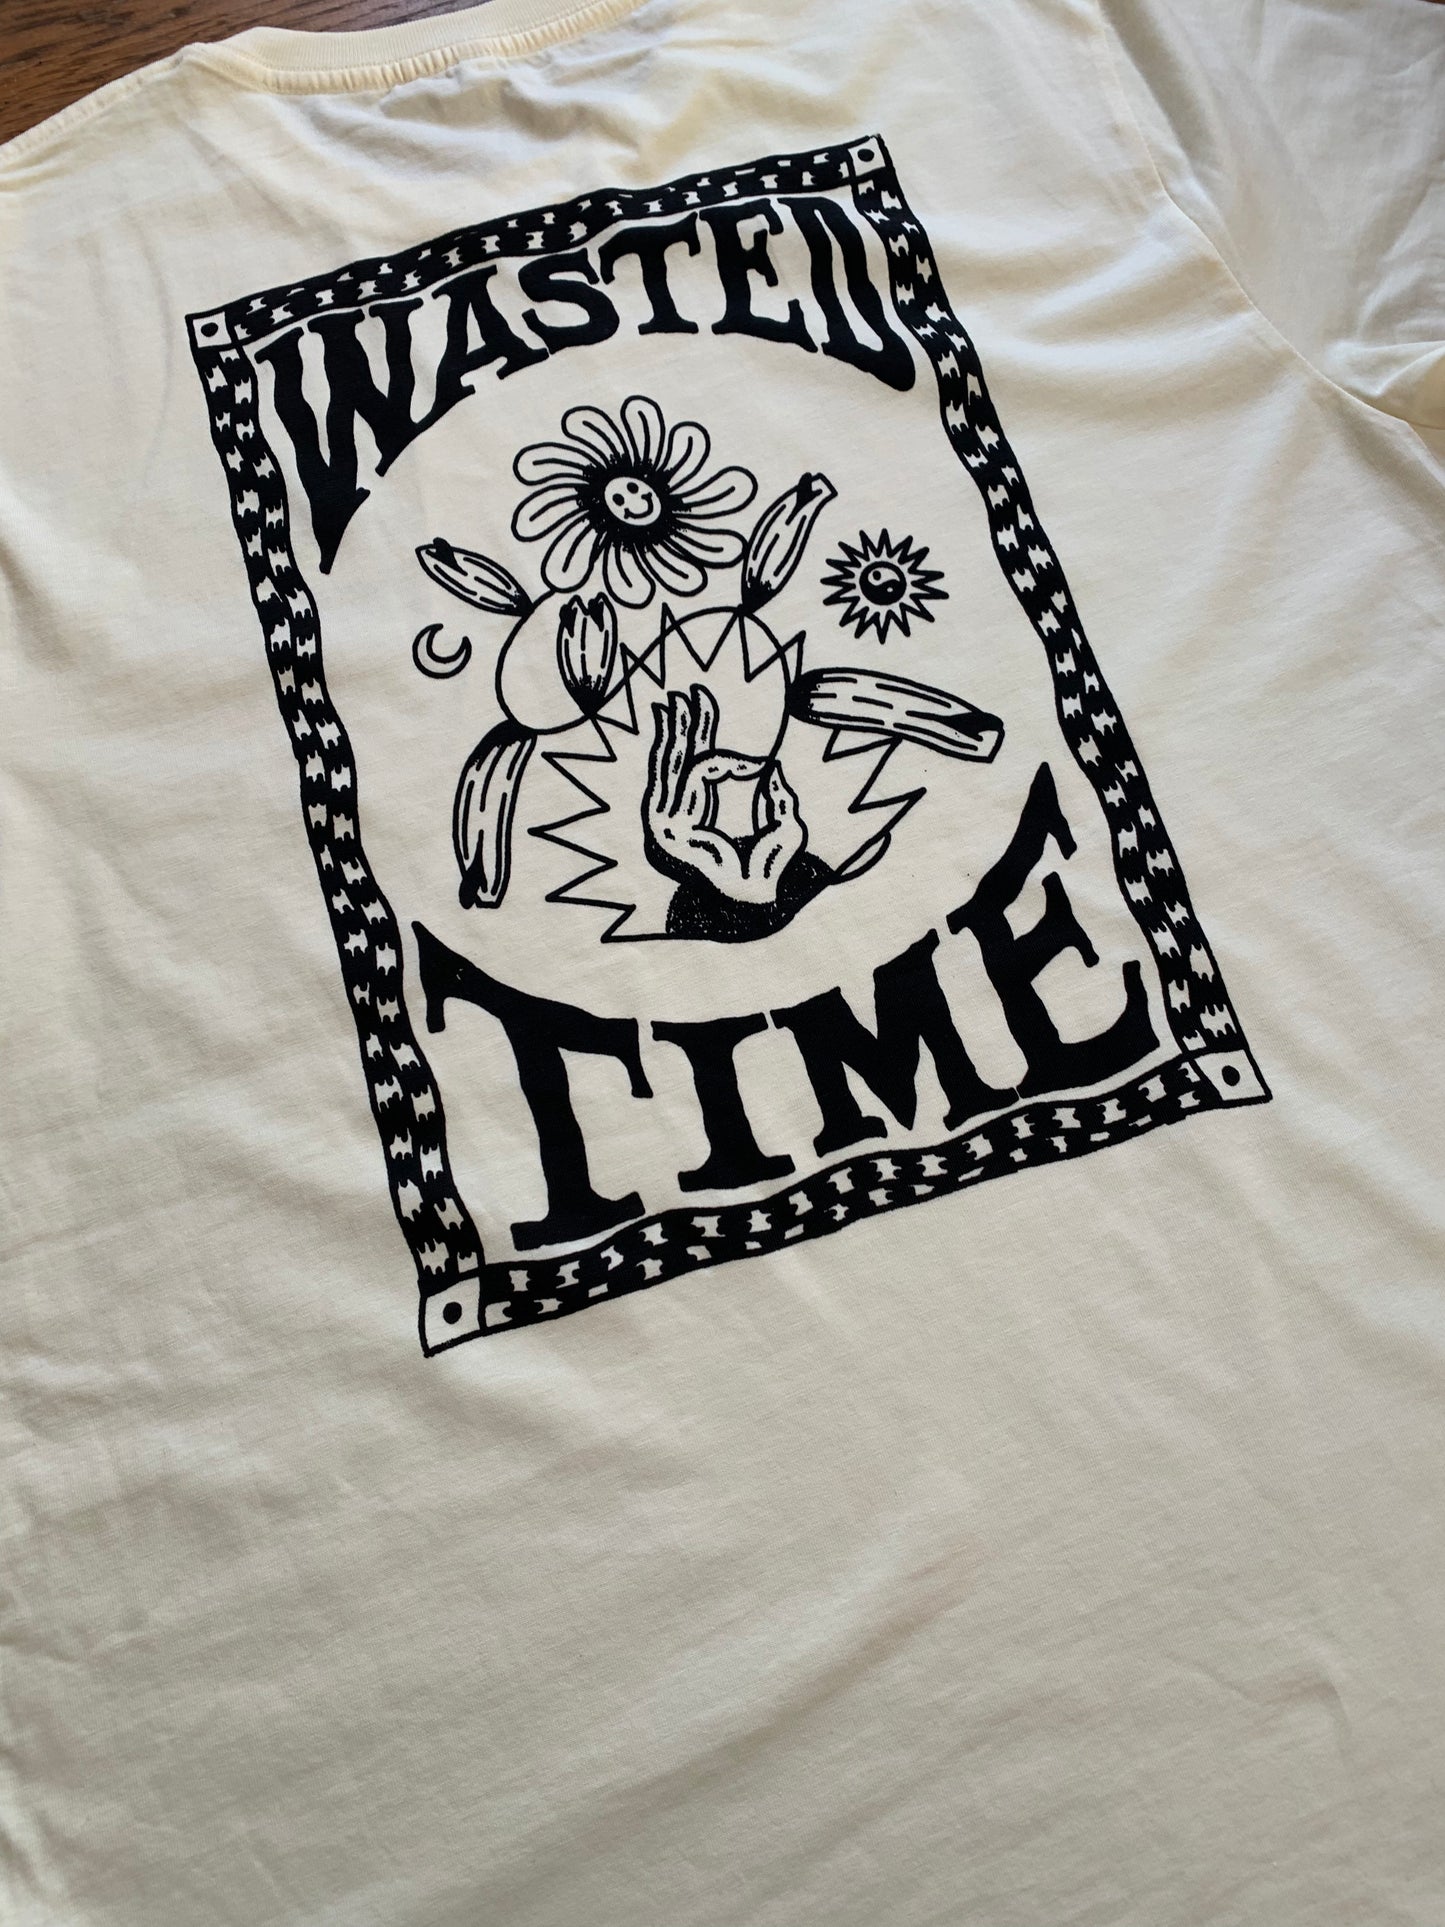 Wasted Time T-shirt